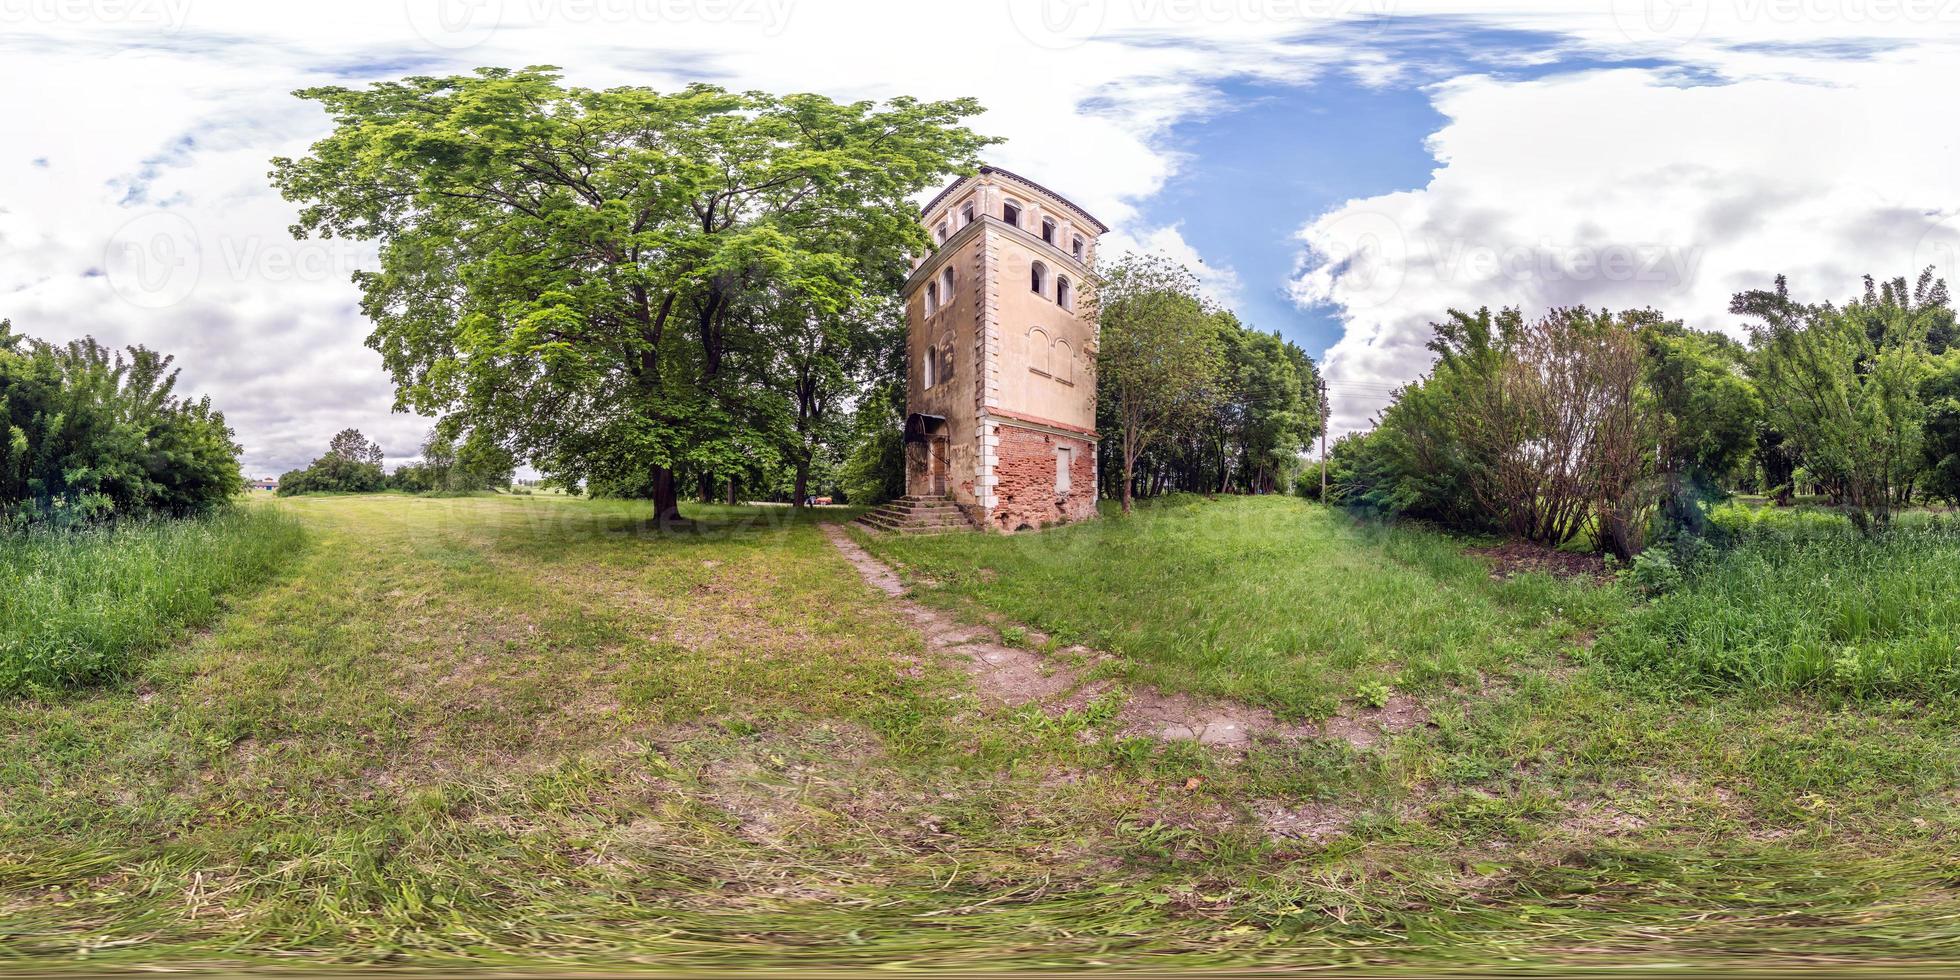 full seamless spherical hdri panorama 360 degrees angle view on old stone abandoned fire tower in village park in equirectangular projection, ready for  VR AR virtual reality content photo